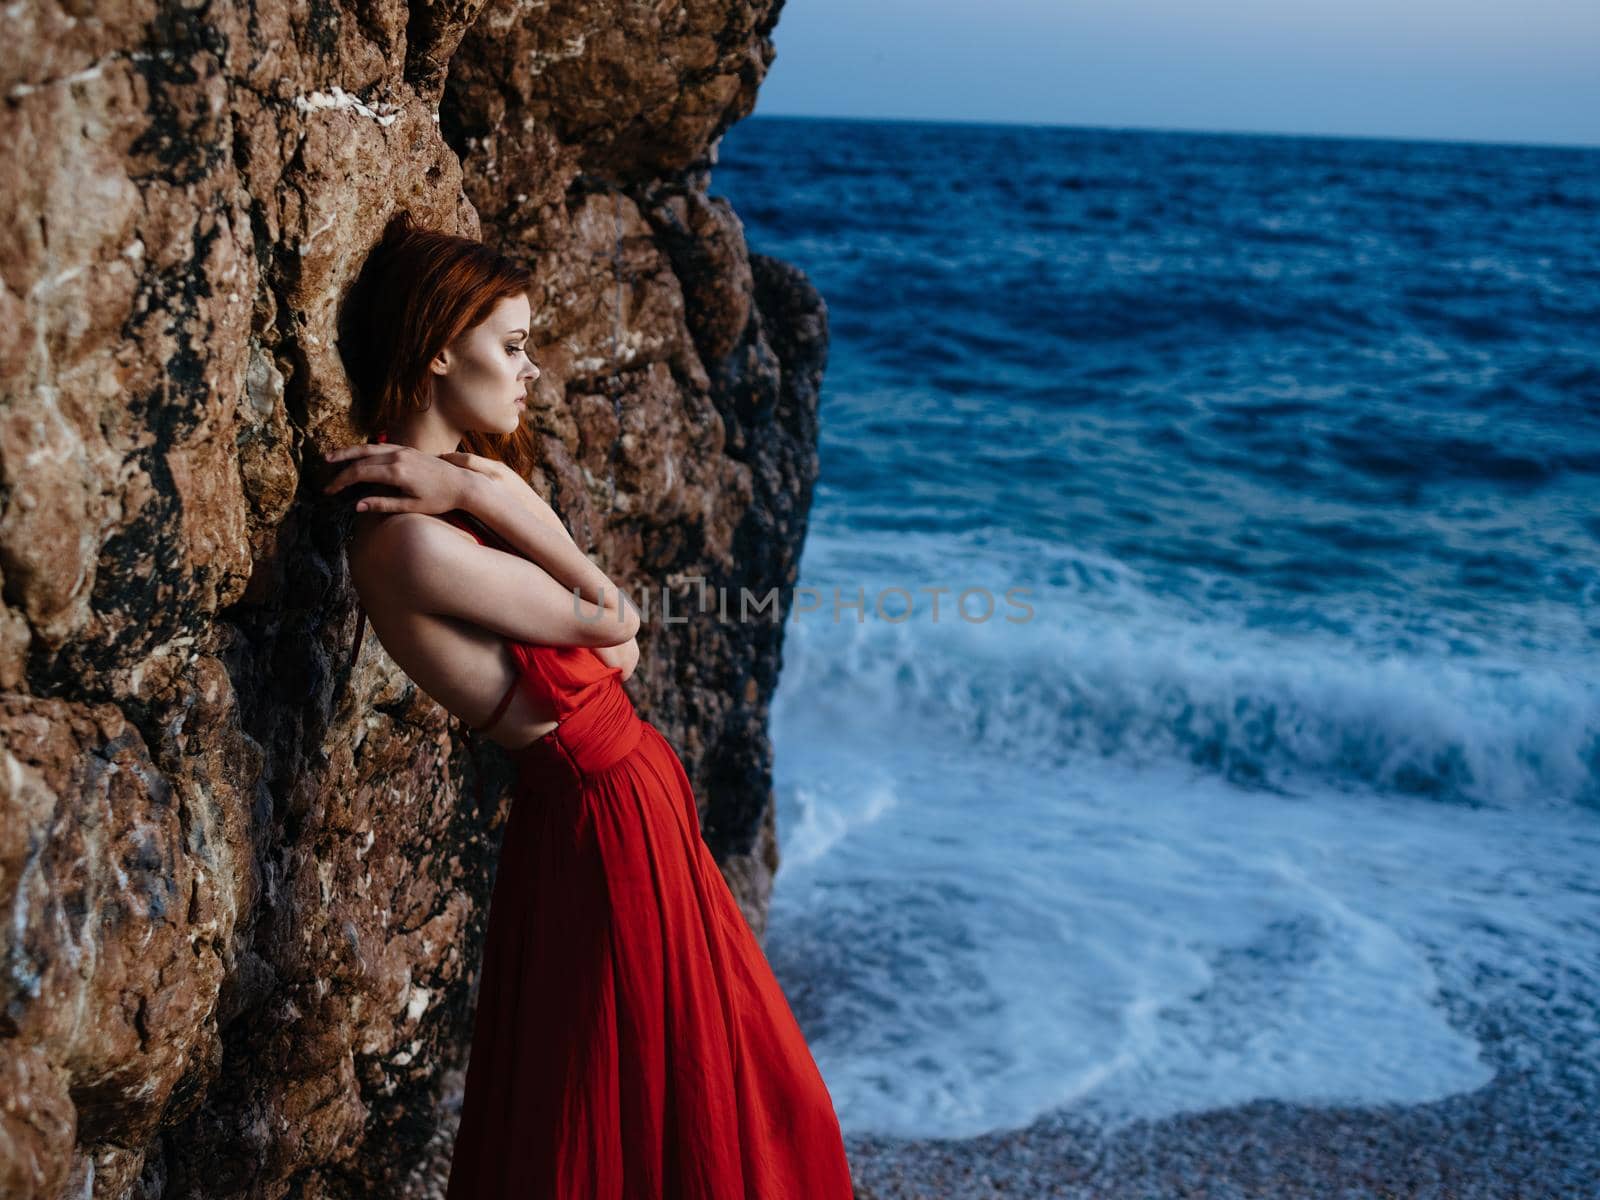 Woman in red dress rocky stone landscape ocean waves. High quality photo